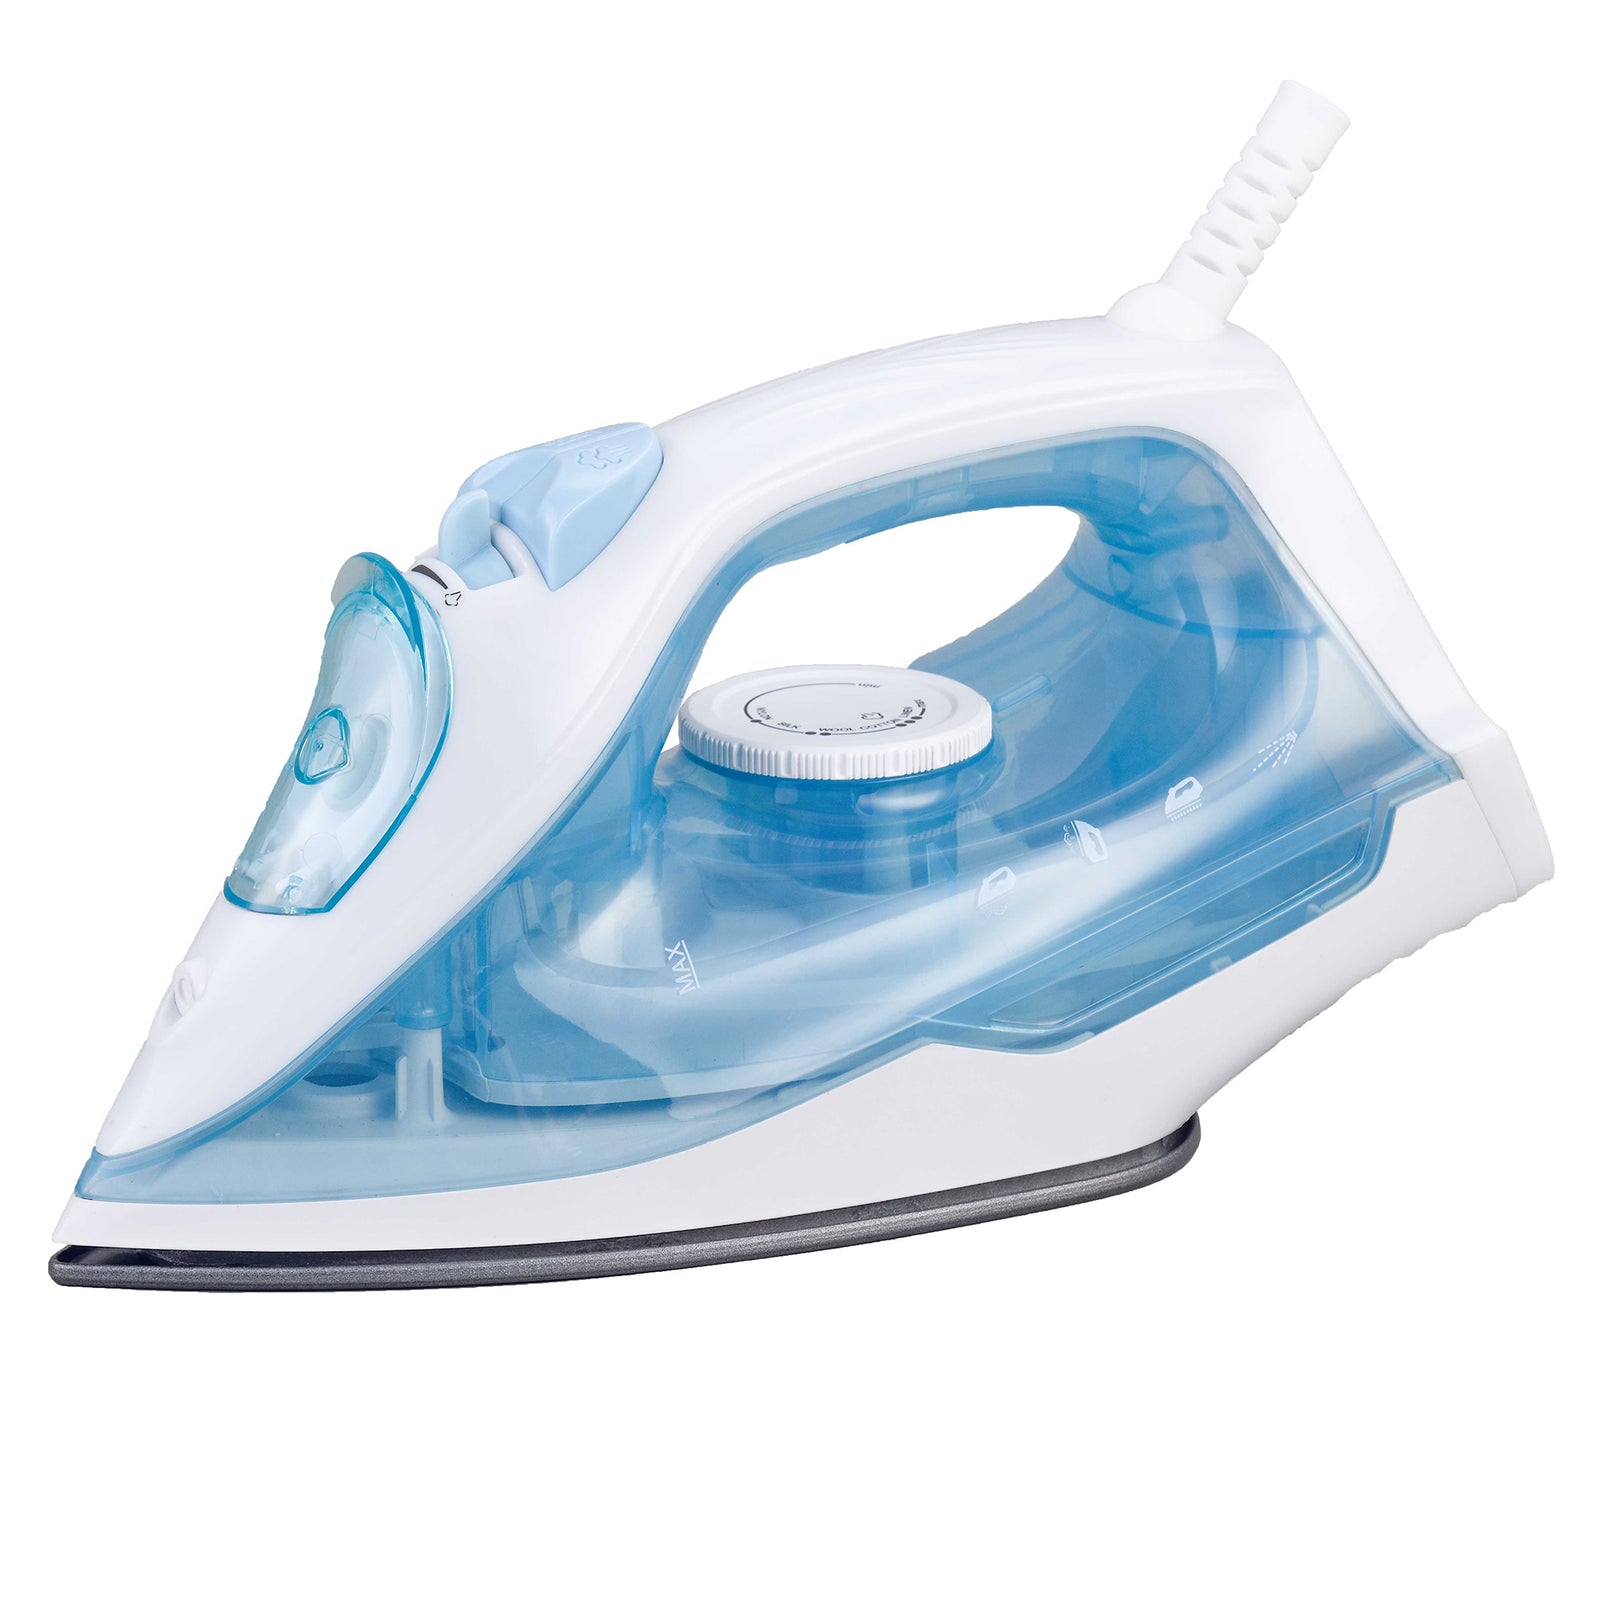  Brentwood MPI-70 Clothes Iron : Home & Kitchen